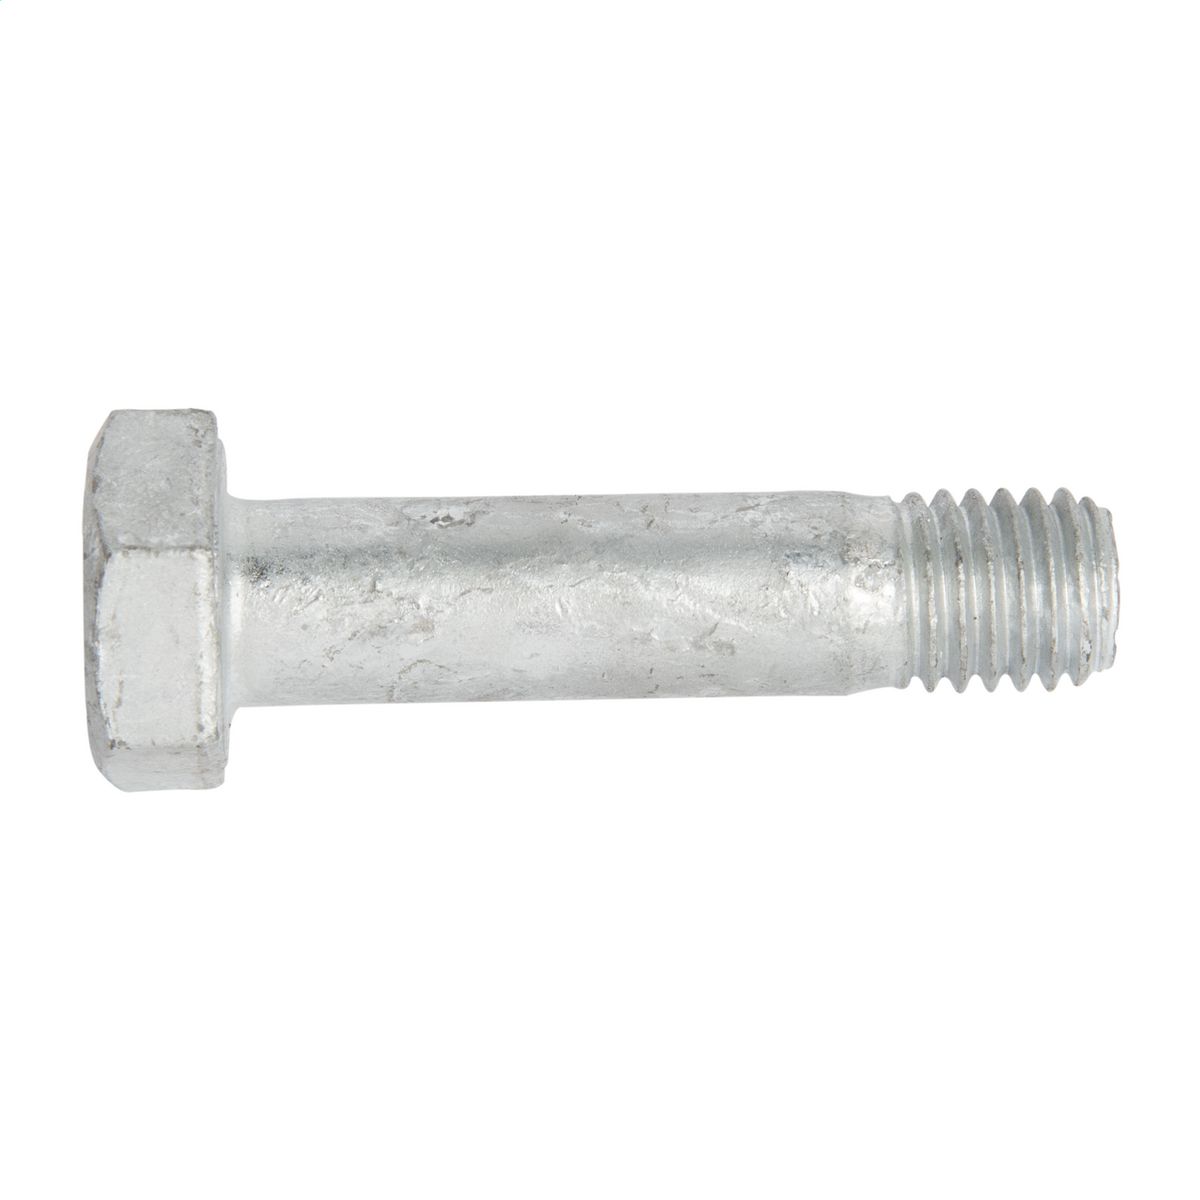 External Hex Brookview Bolt 1/2-13 Thread Size 1 Long Pack of 10 Pack of 10 1 Long Small Parts 50C100HCSN Hex Head Screw 1/2-13 Thread Size Nylon 